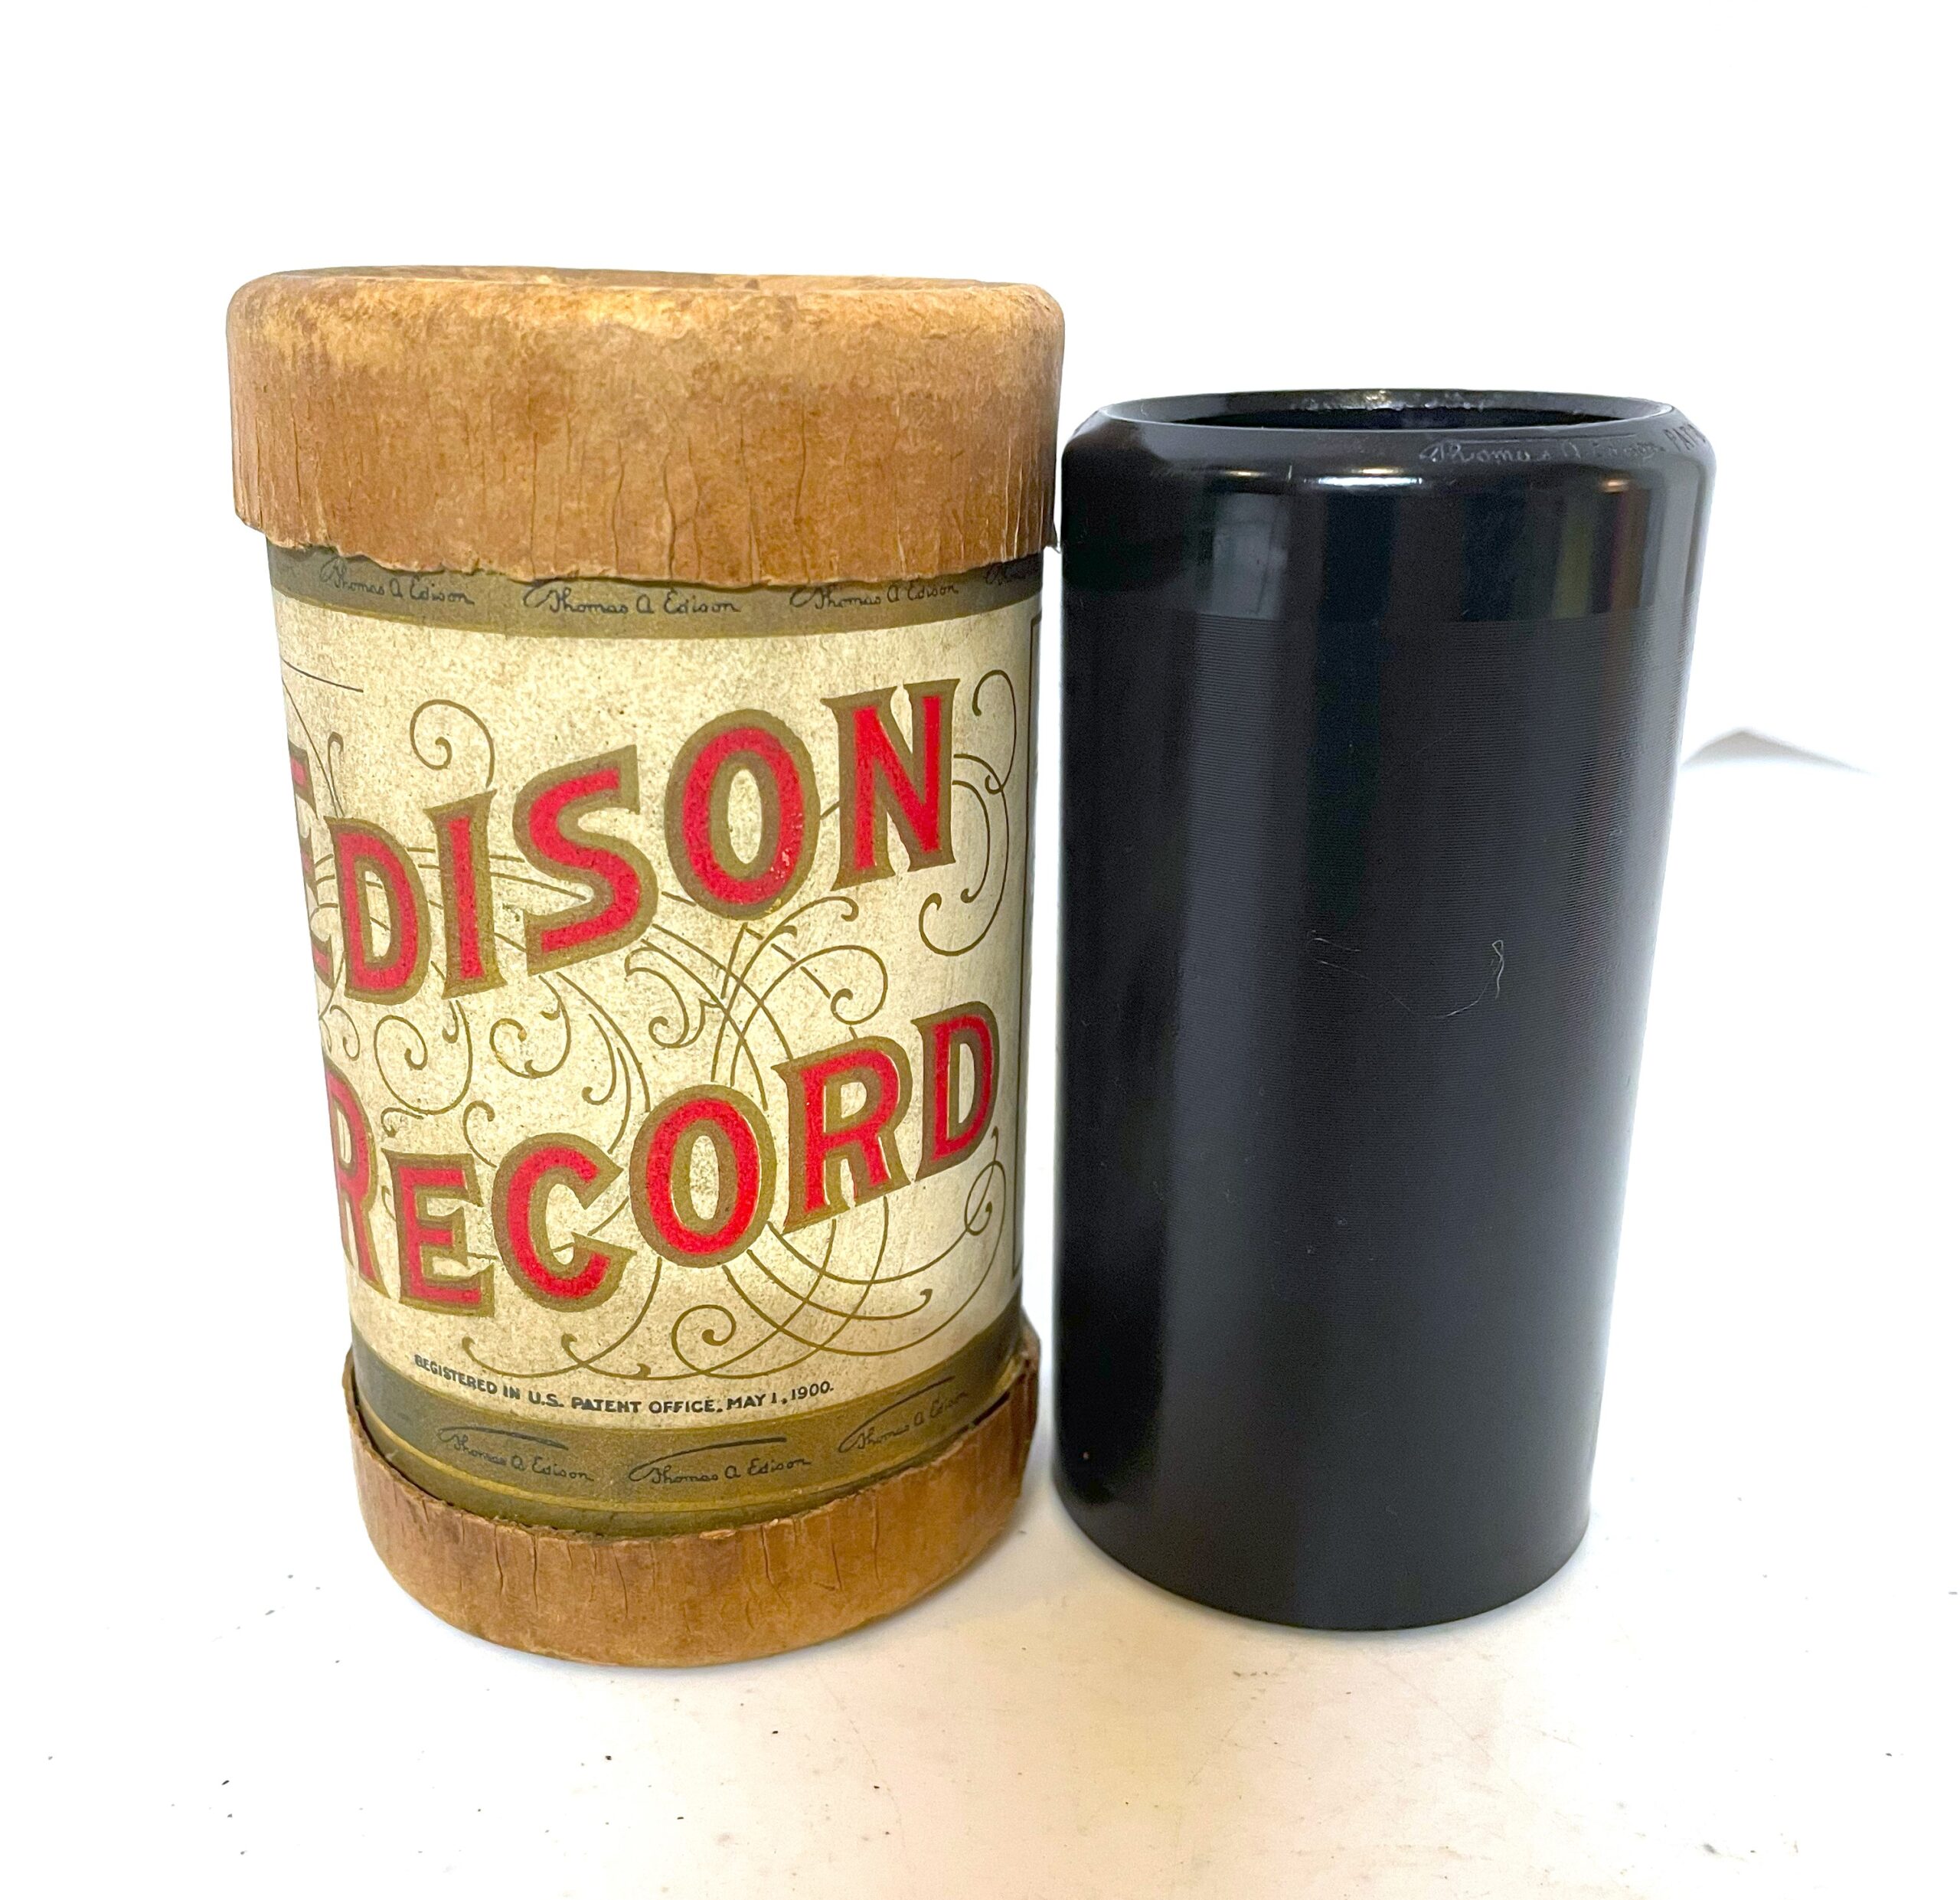 Edison 2-minute Cylinder…” The Sweetest Gal in Town” (Comic Song)